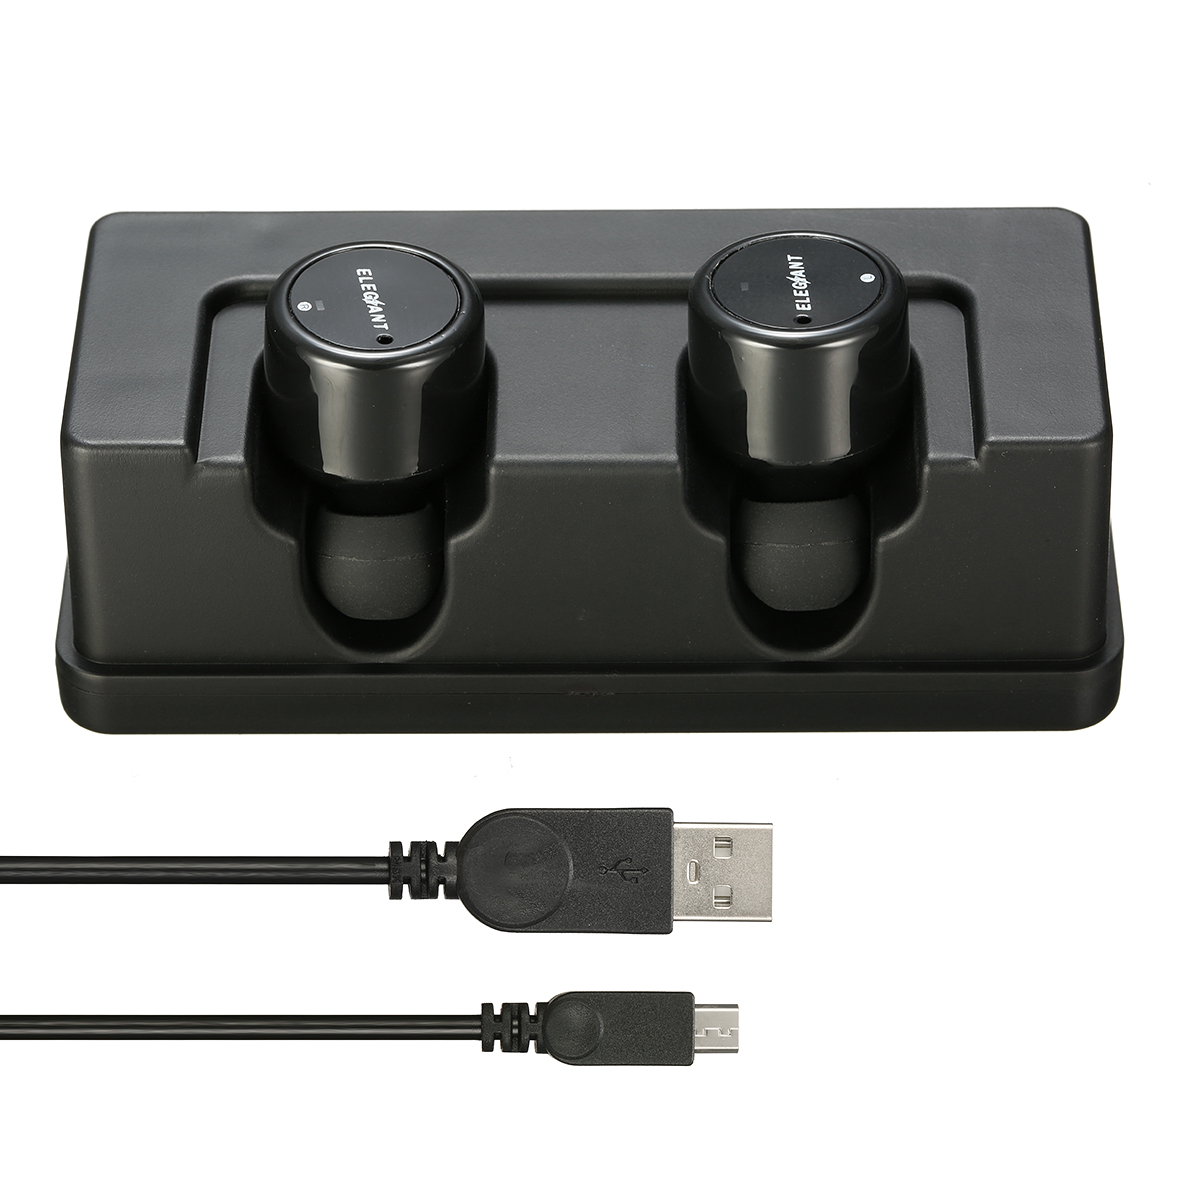 X1T-Charging-Cradle-1500mAh-Charging-Station-for-Earbuds-for-Earphone-MP3-MP4-for-Mobile-Phone-1890971-10